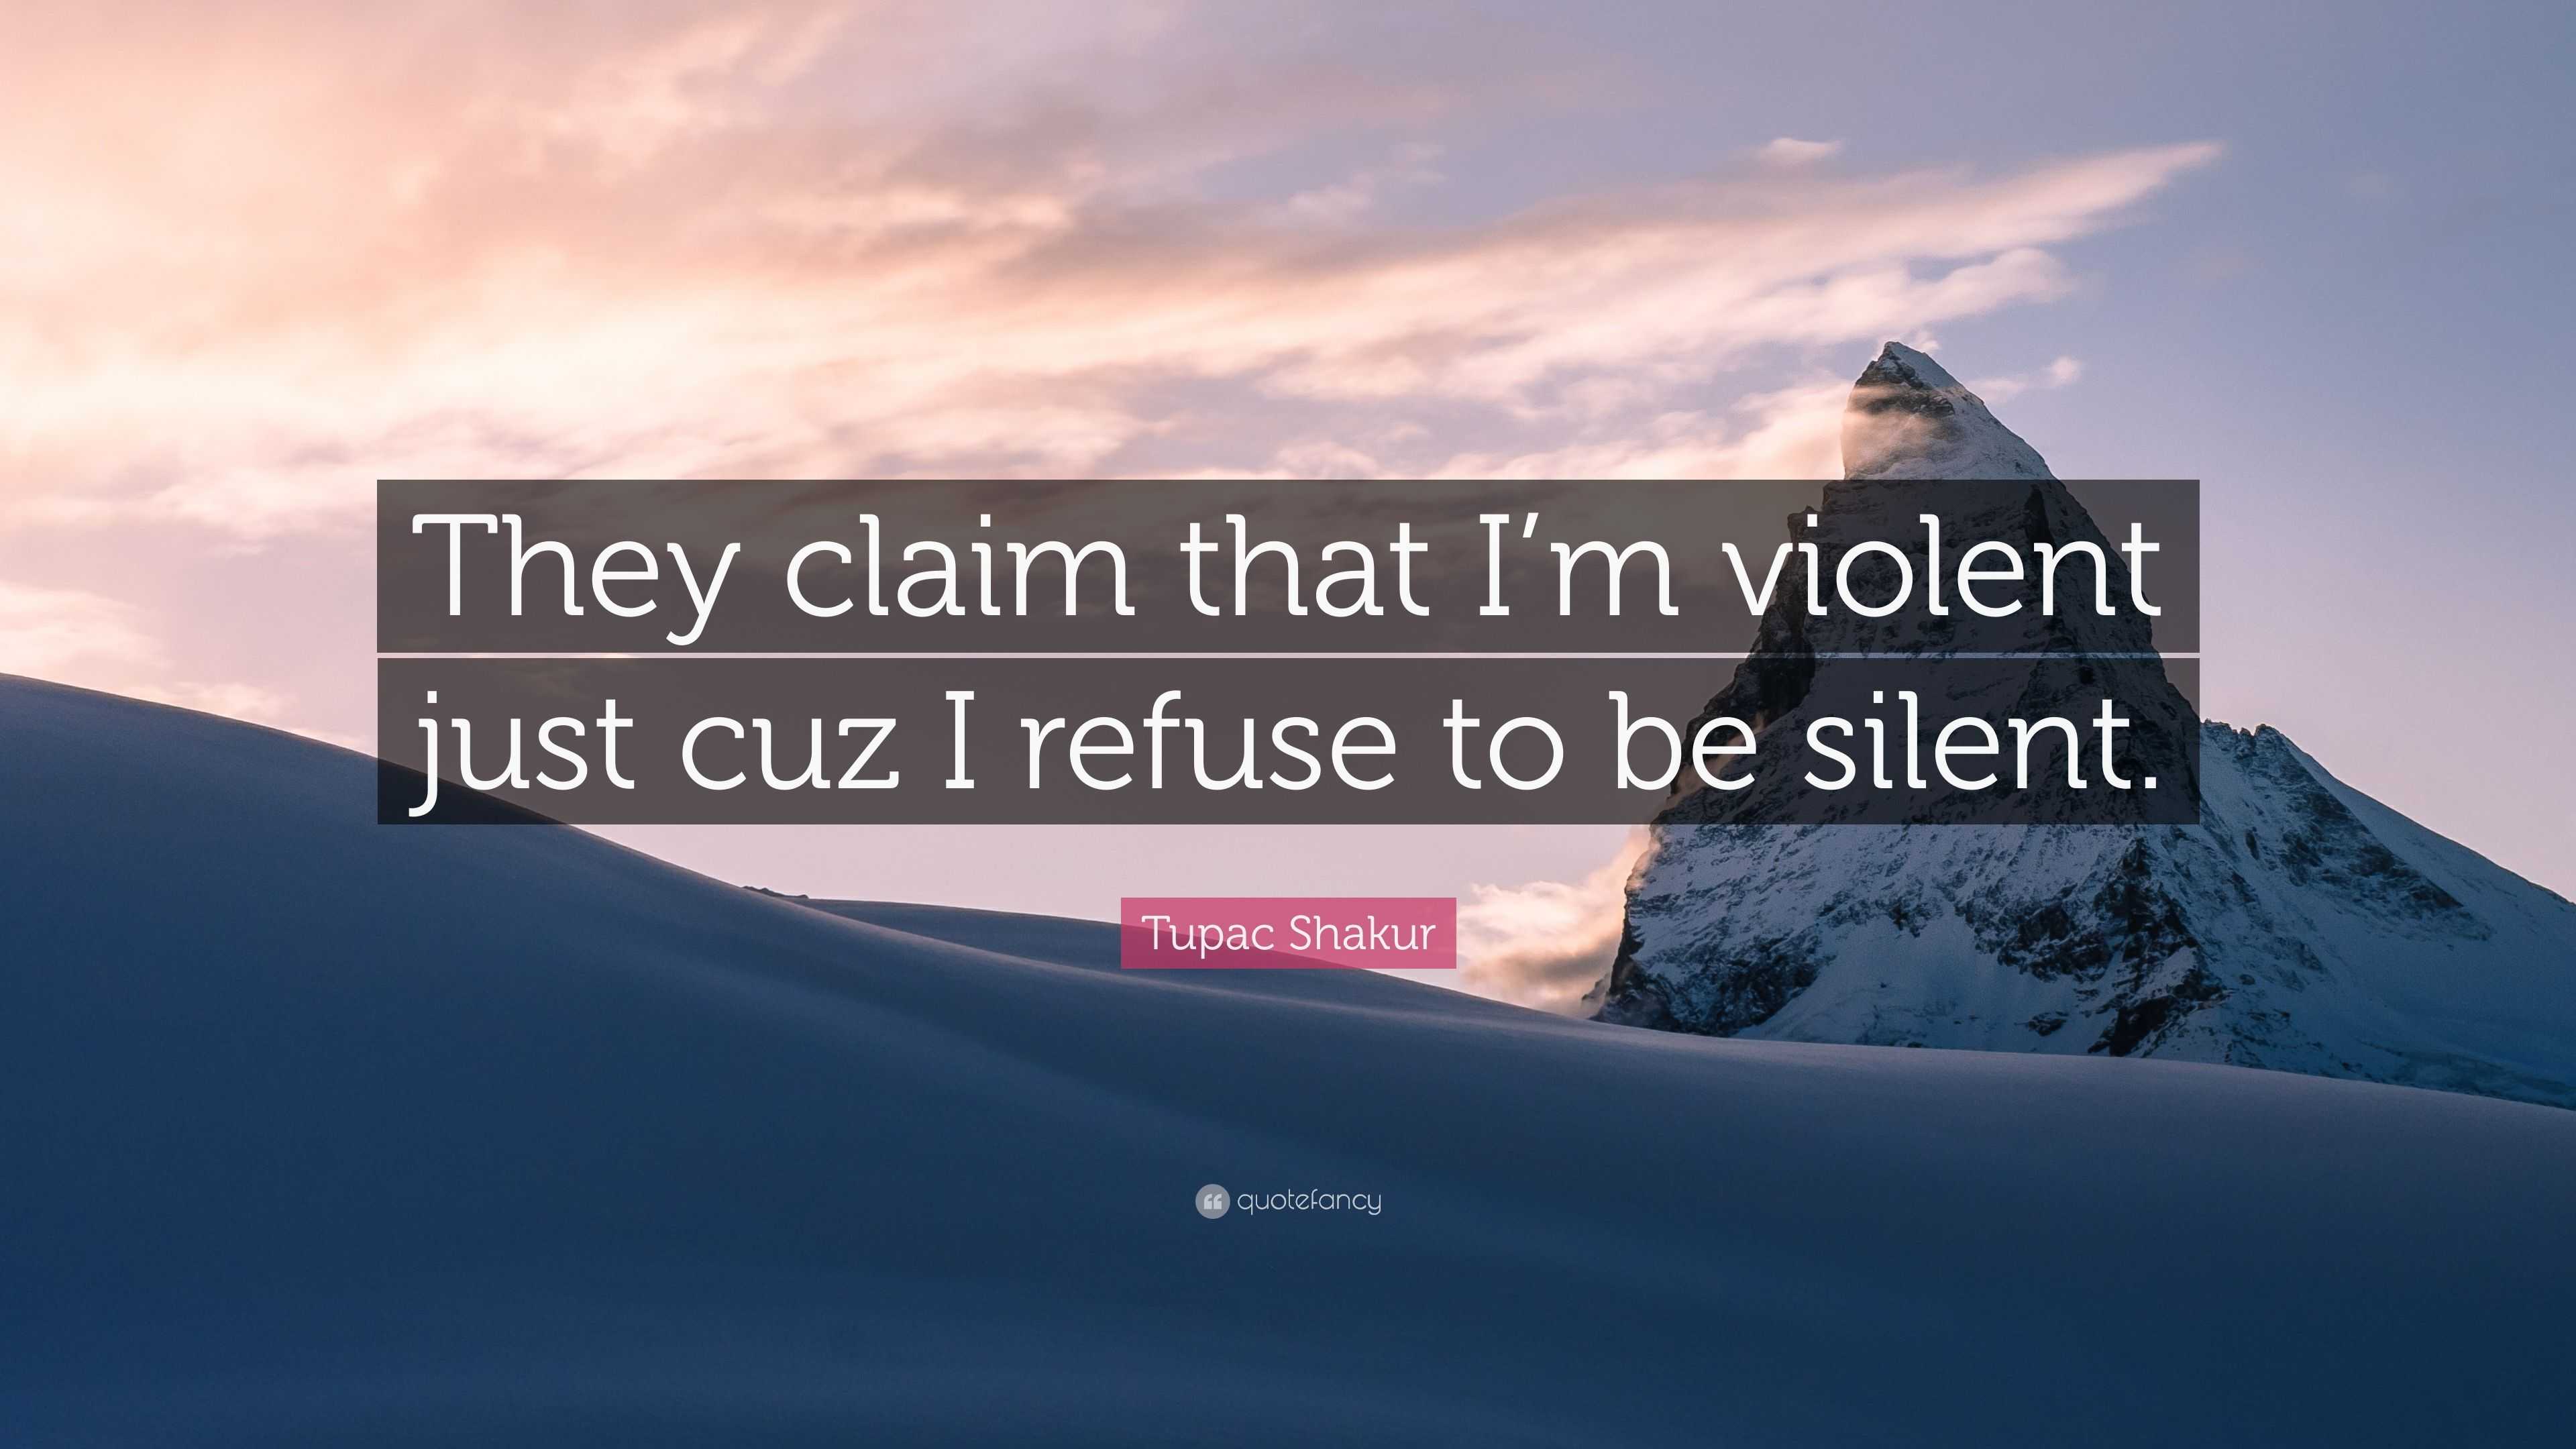 Tupac Shakur Quote: "They claim that I'm violent just cuz ...